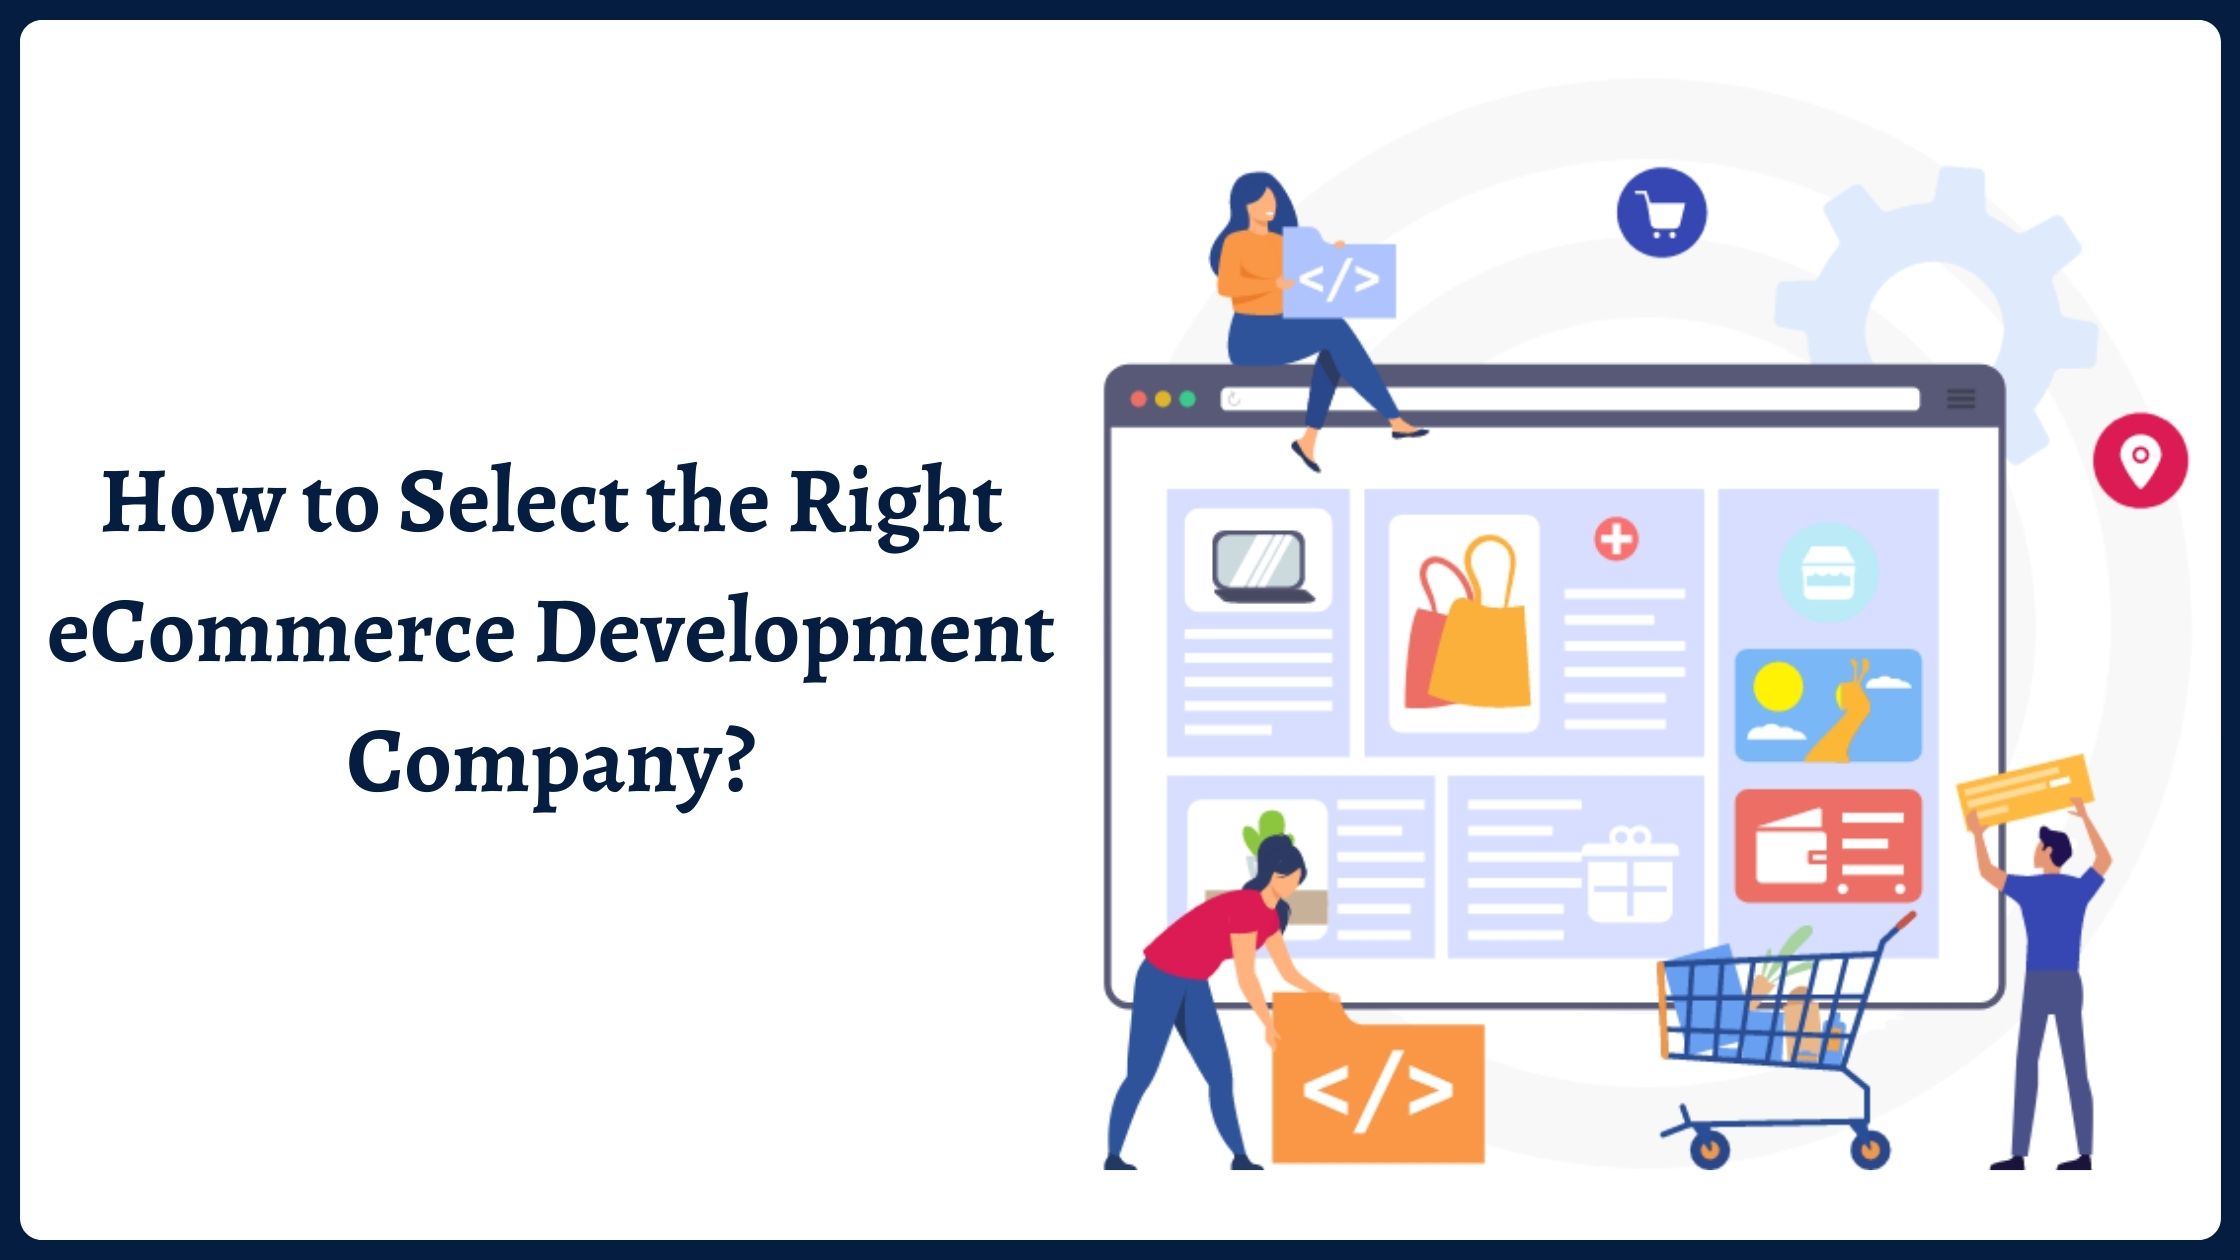 How to Select the Right eCommerce Development Company?